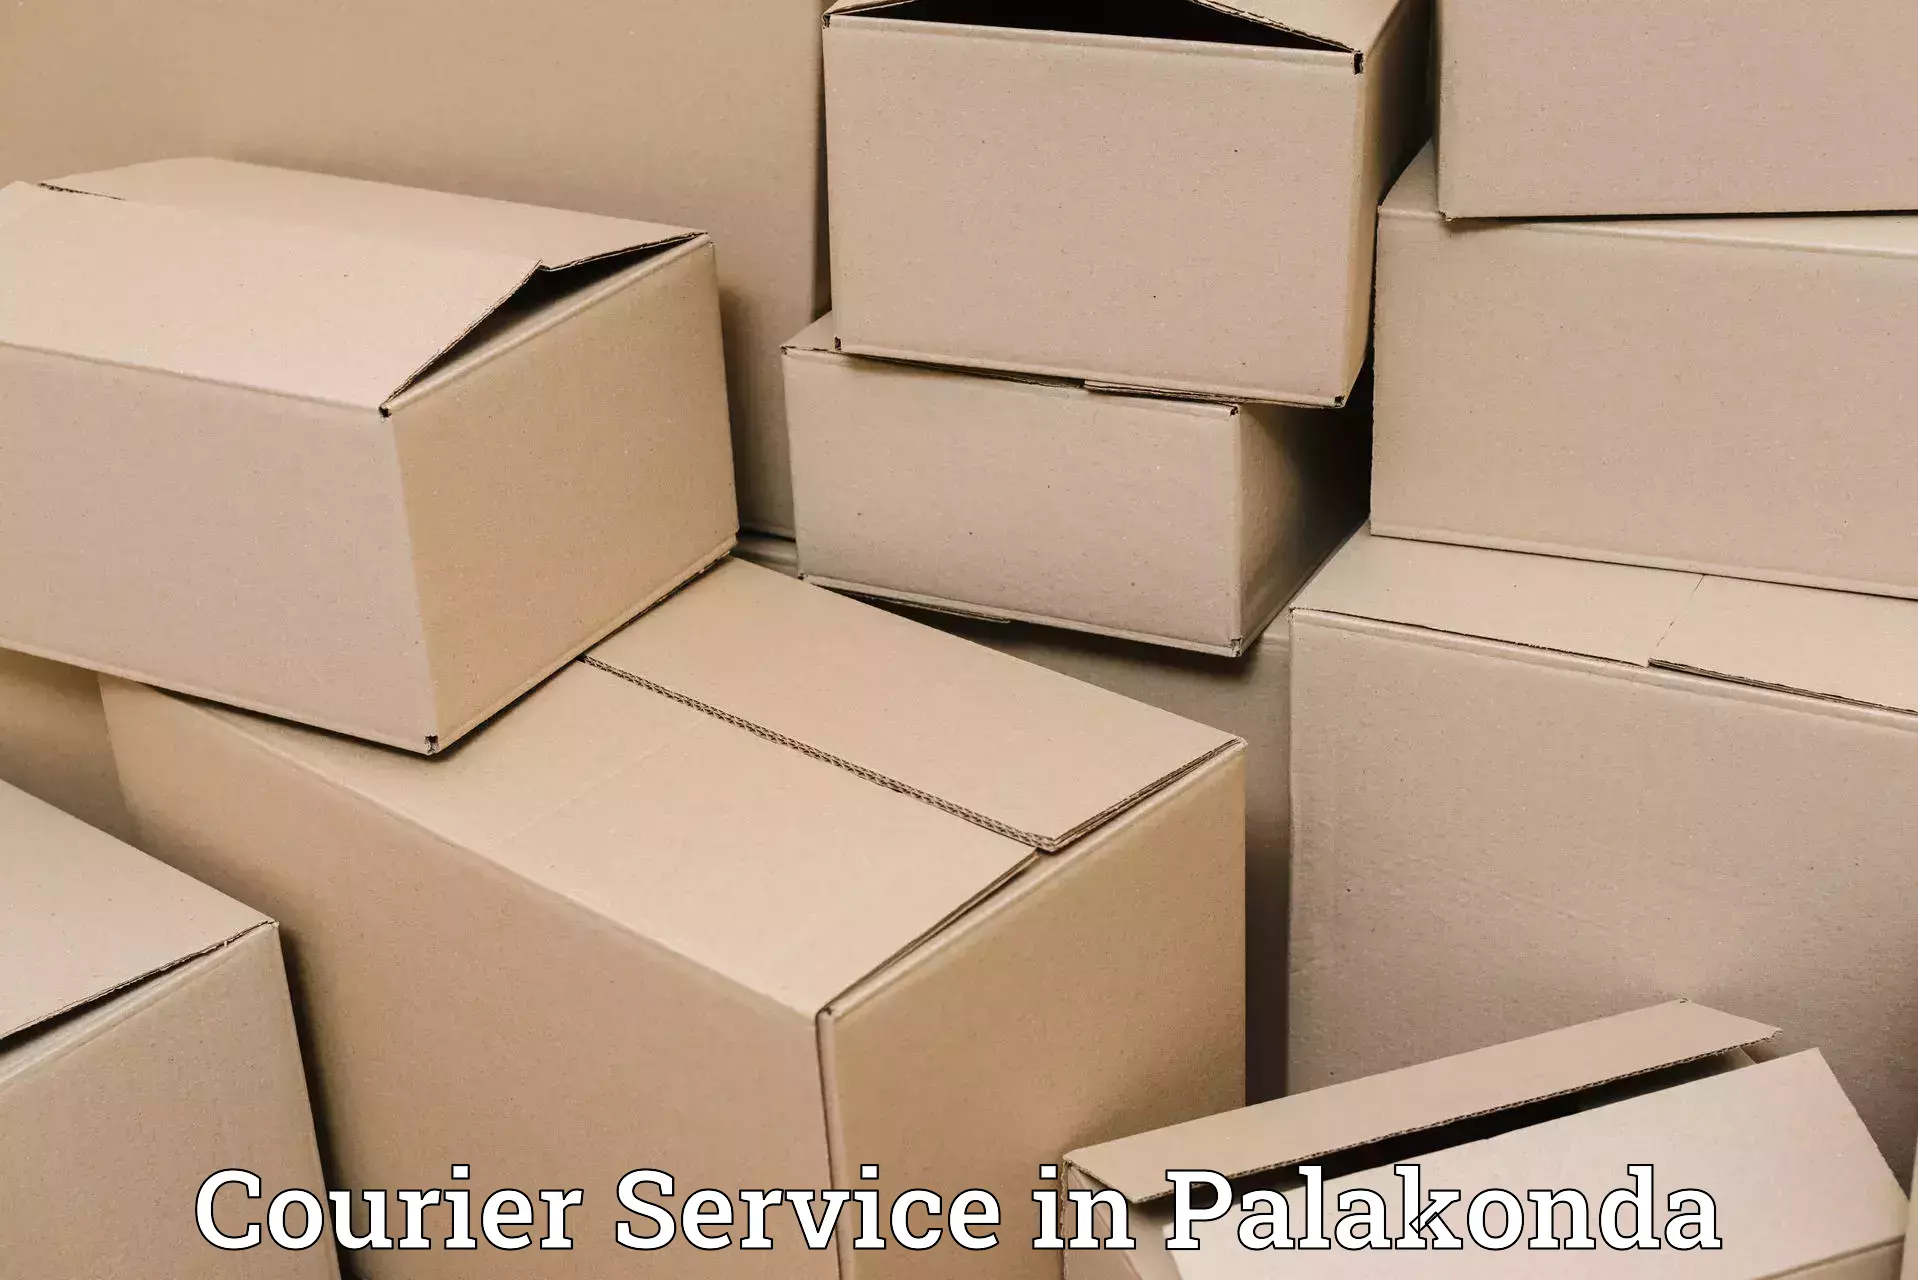 High-quality delivery services in Palakonda